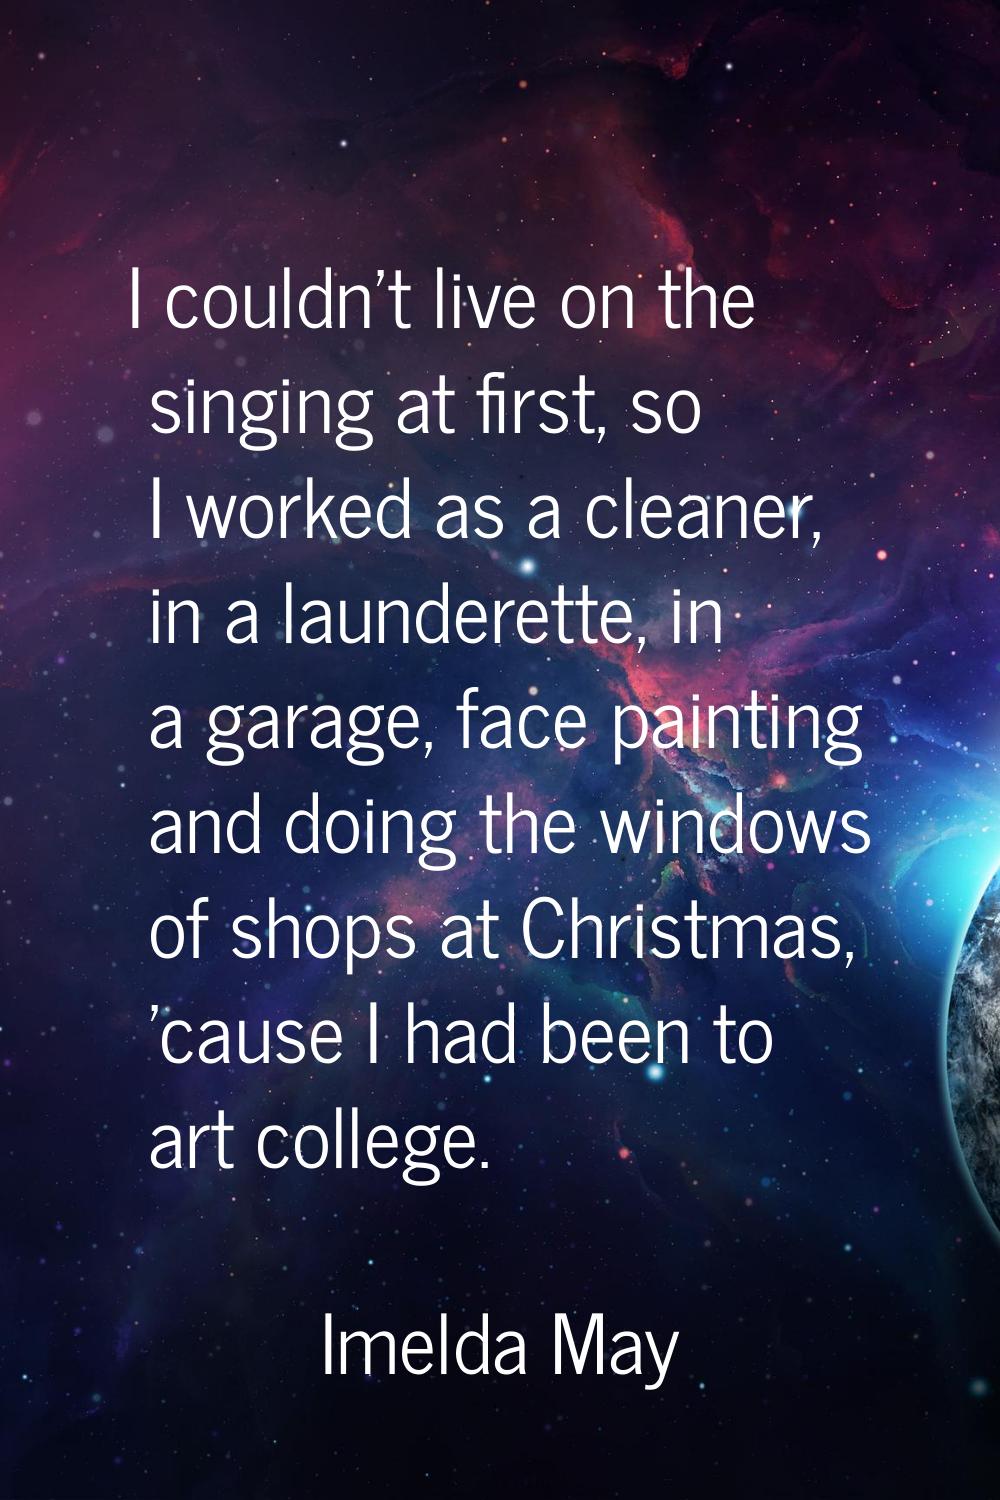 I couldn't live on the singing at first, so I worked as a cleaner, in a launderette, in a garage, f